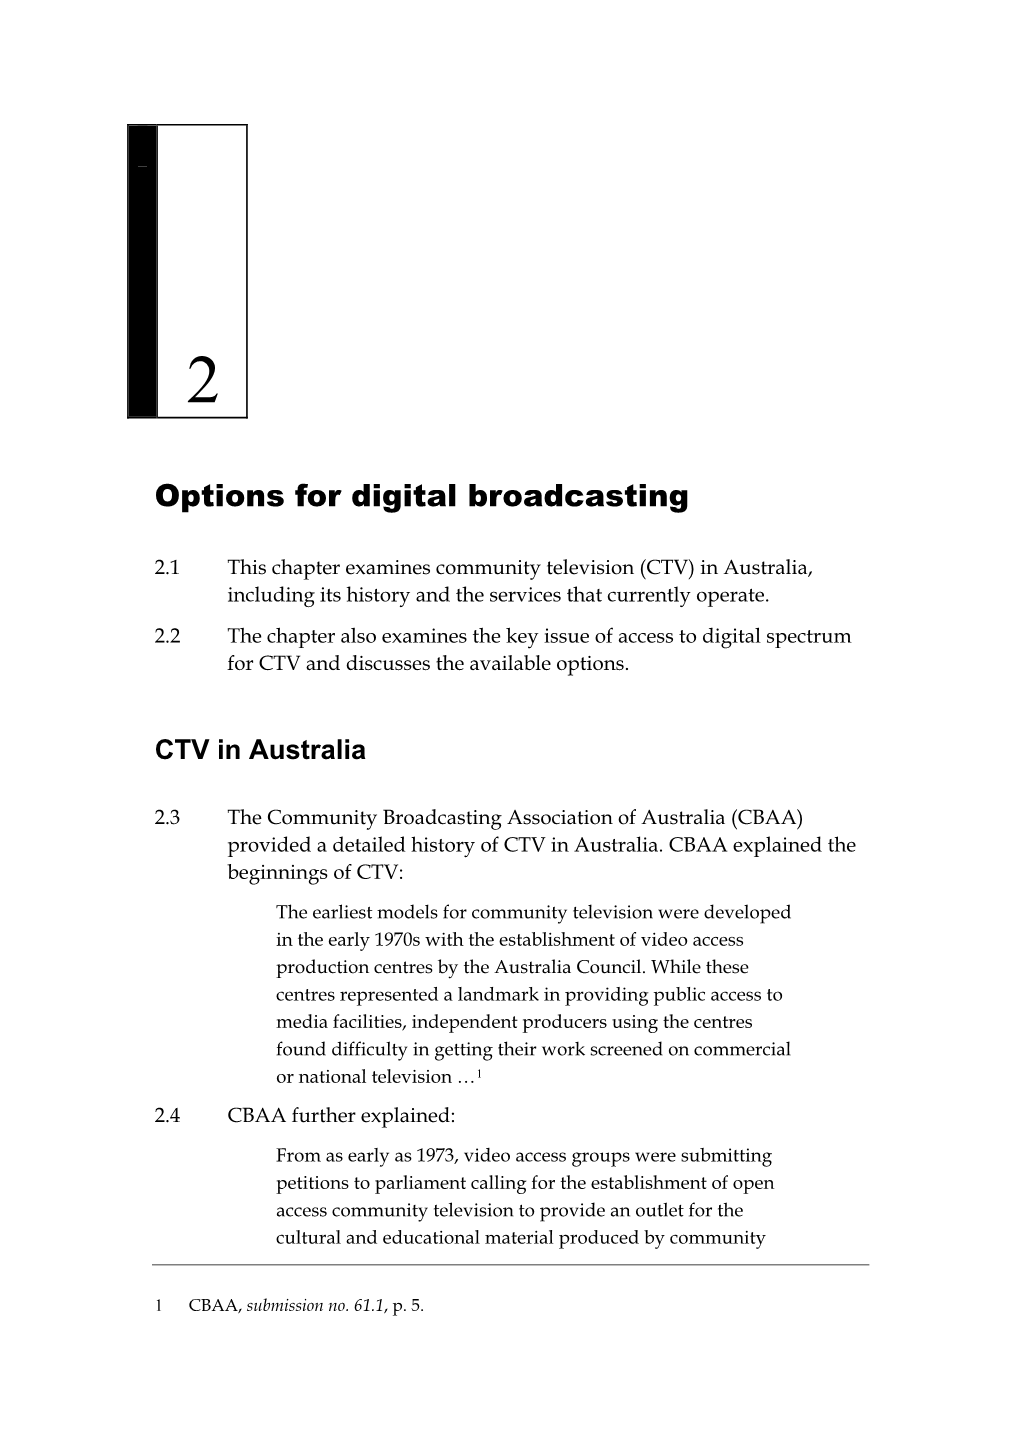 Community Television: Options for Digital Broadcasting